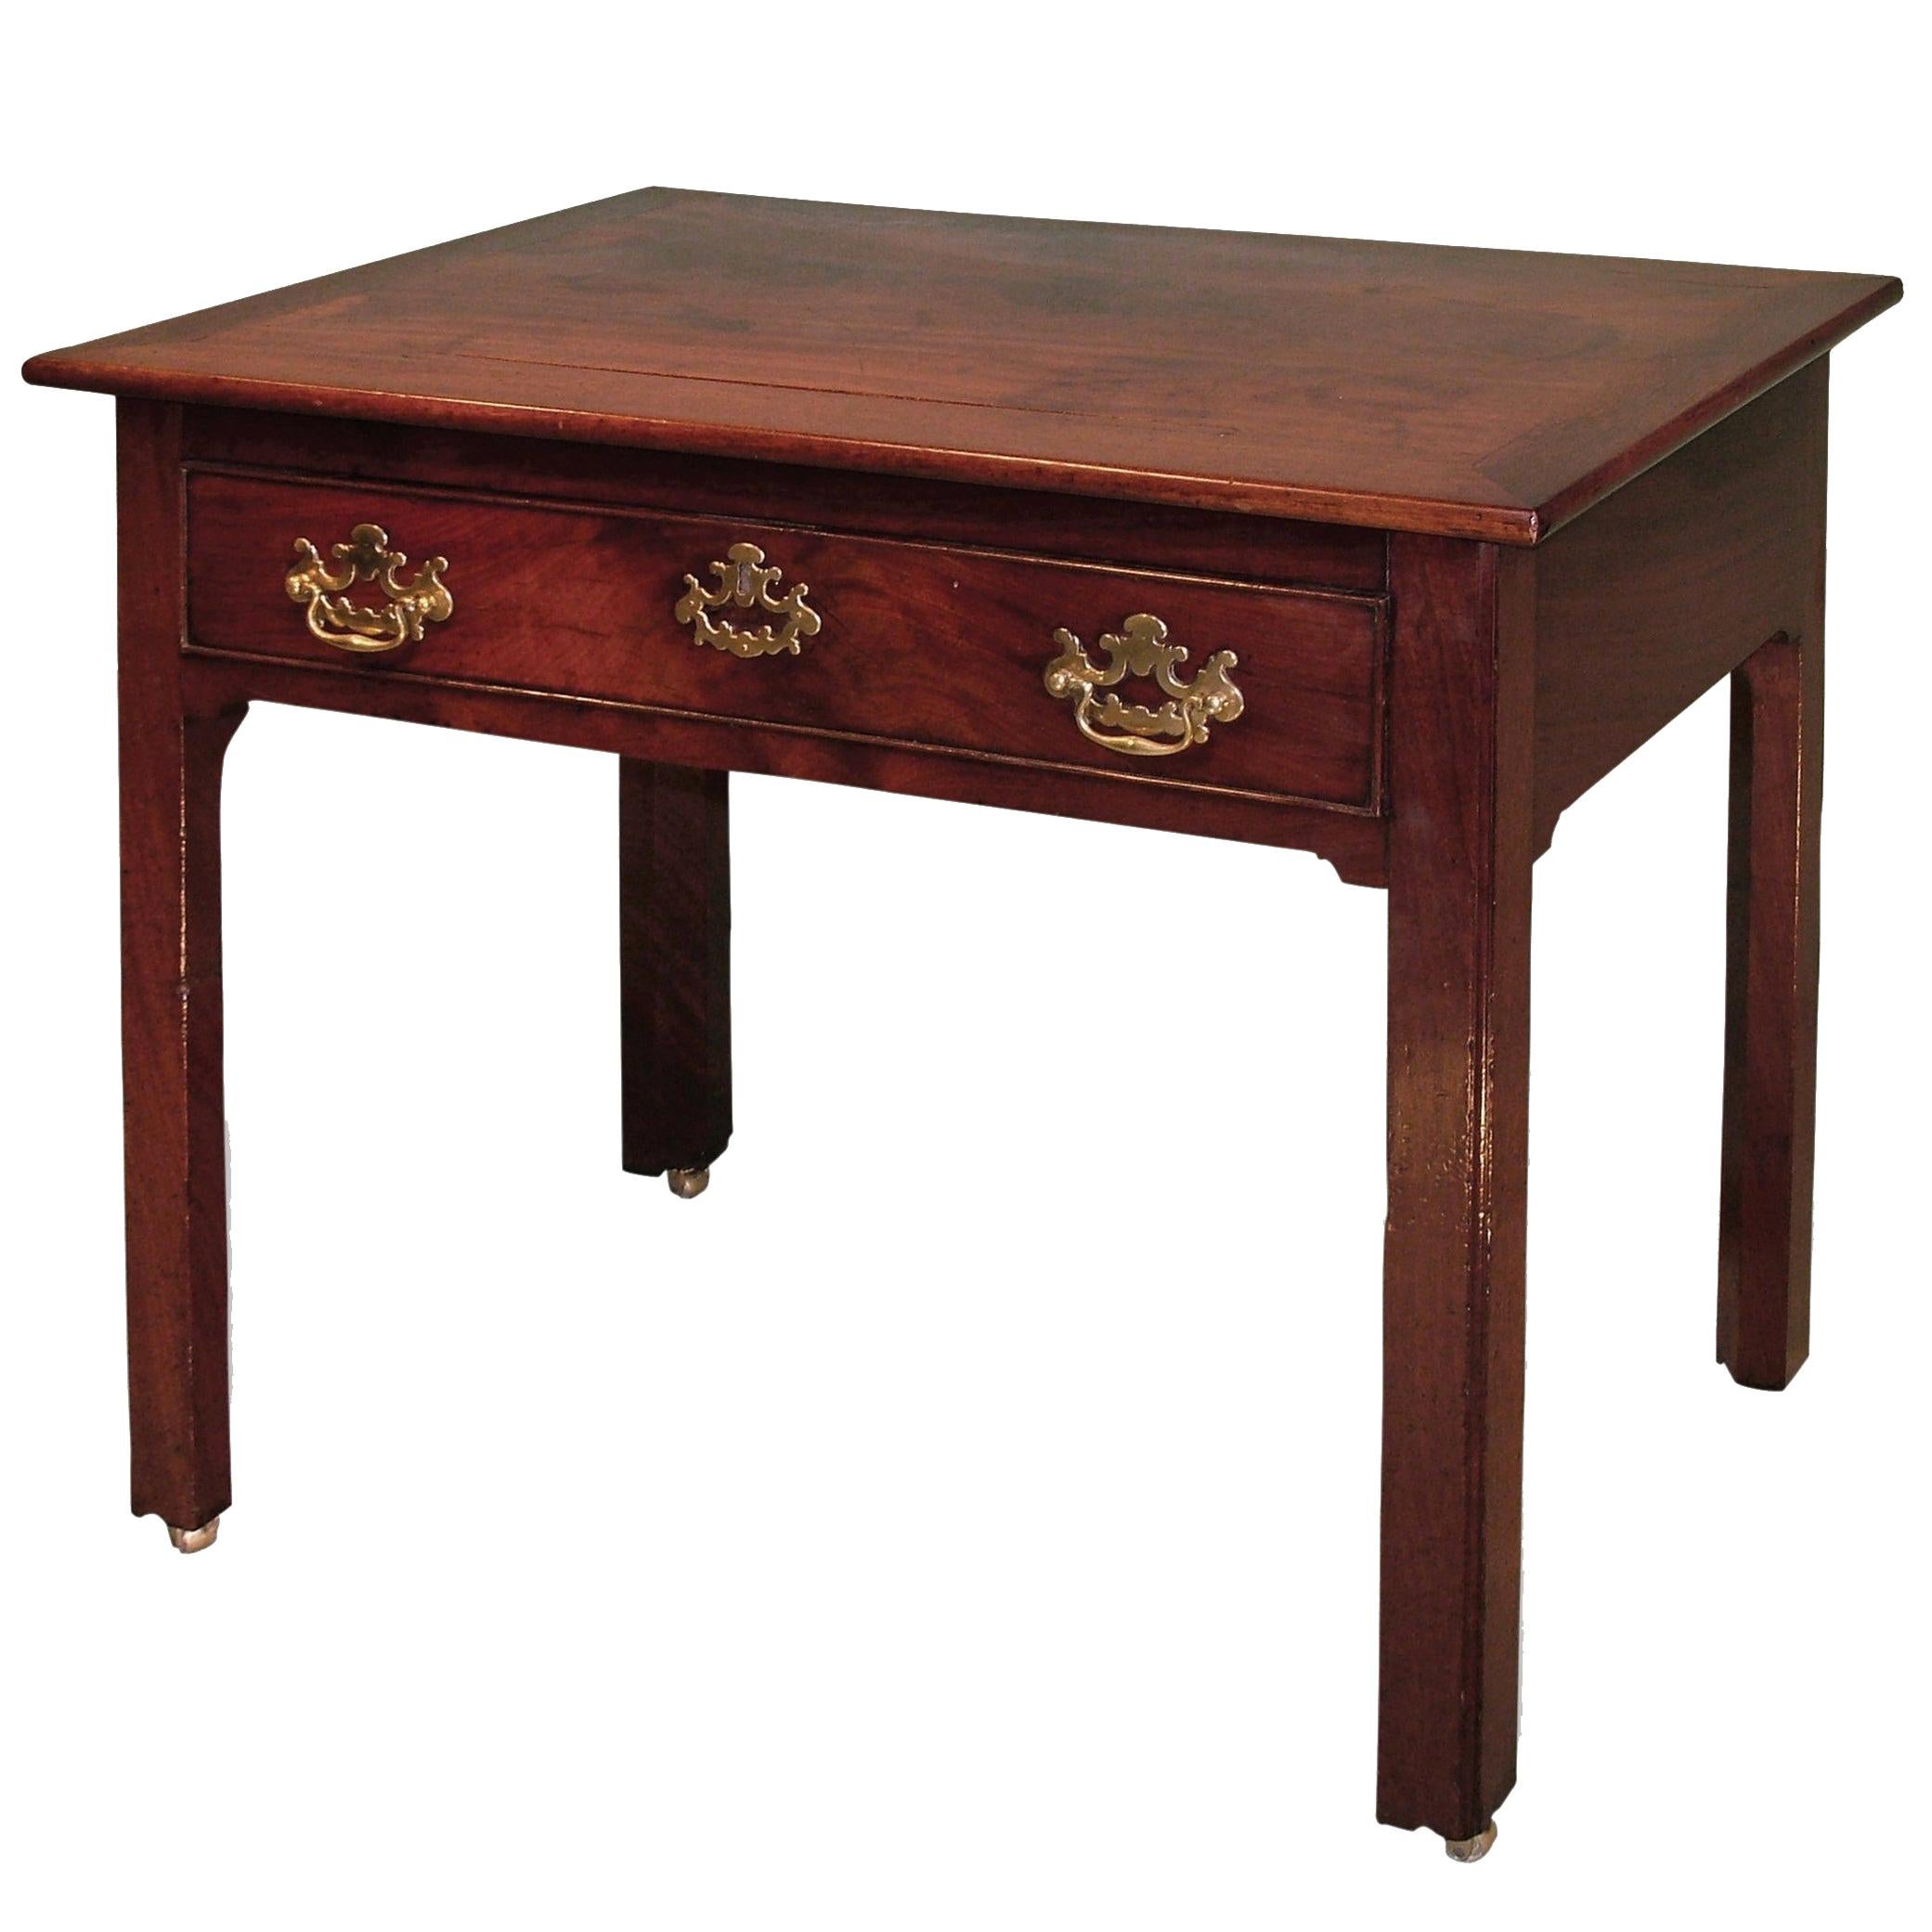 Mid-18th Century Chippendale Period Mahogany Architects Table